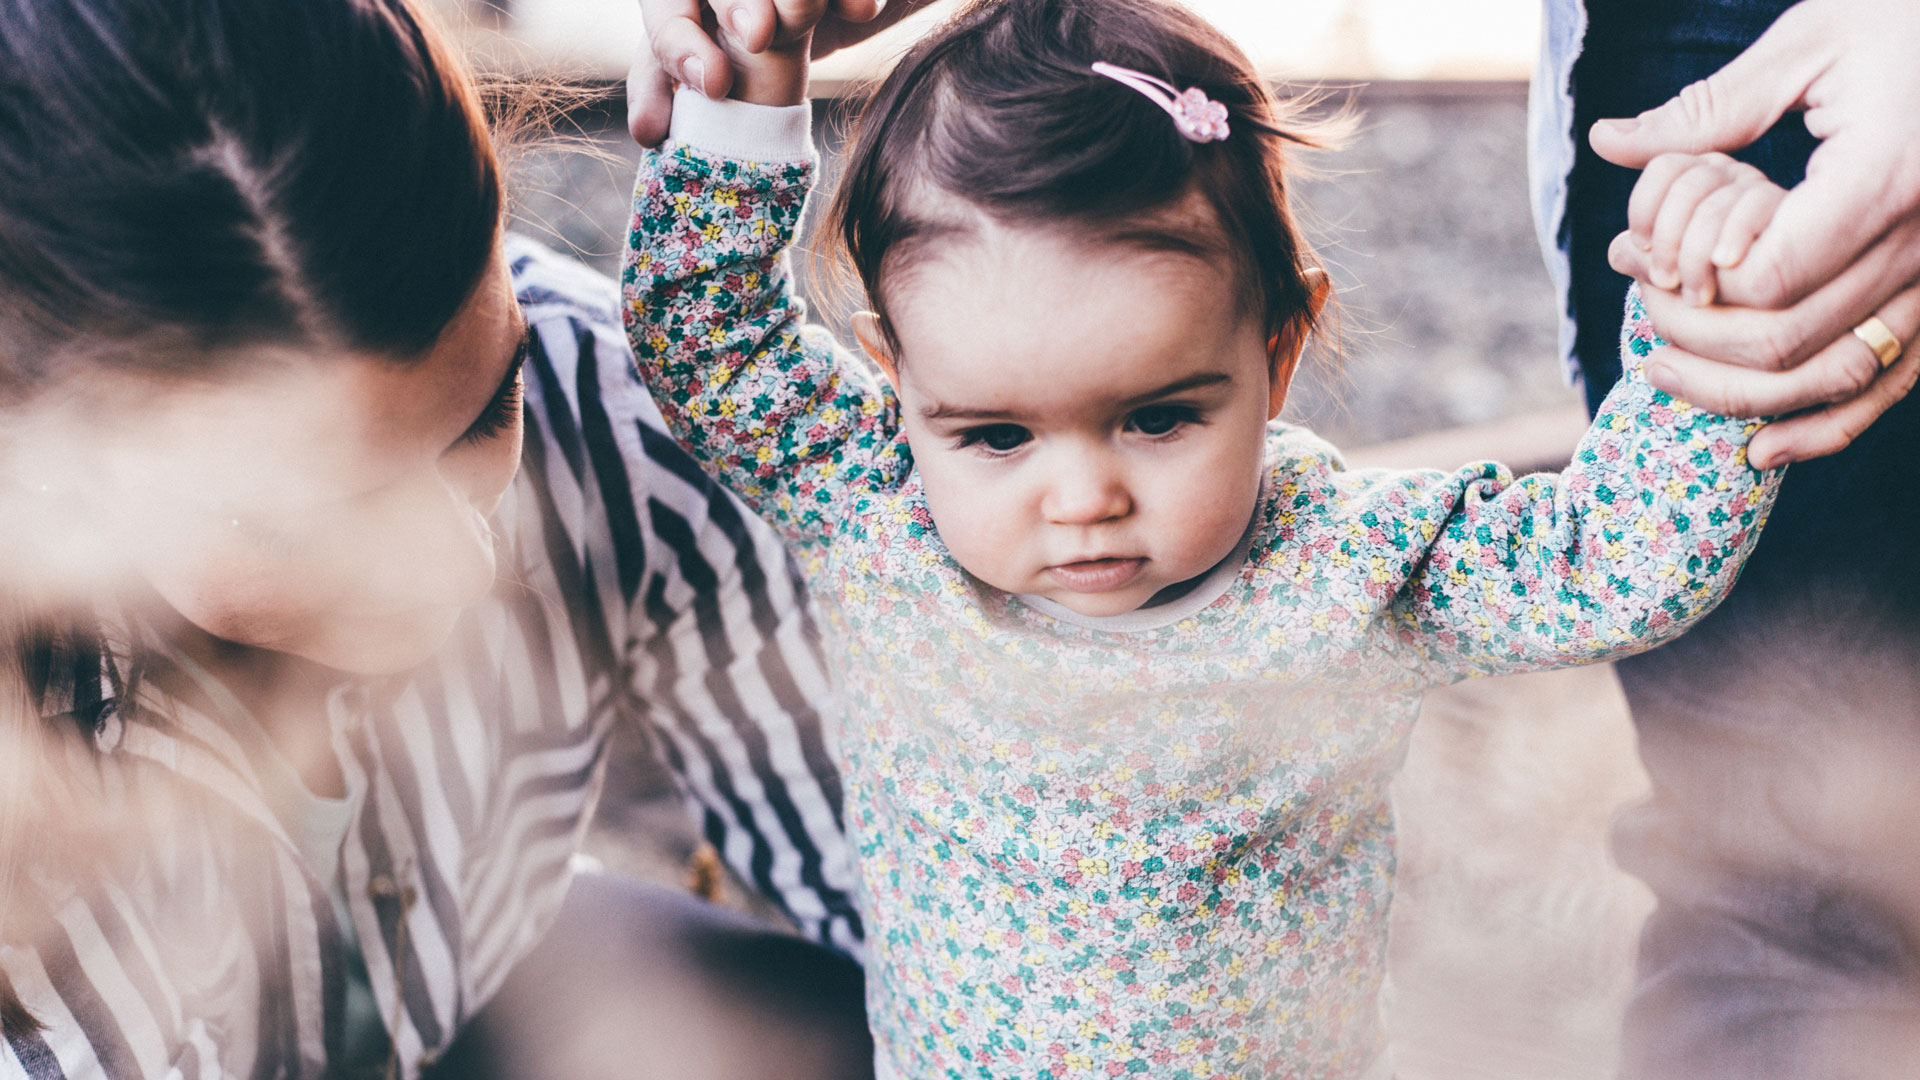 10 THINGS THIS MUM WISHED SHE KNEW BEFORE HAVING KIDS